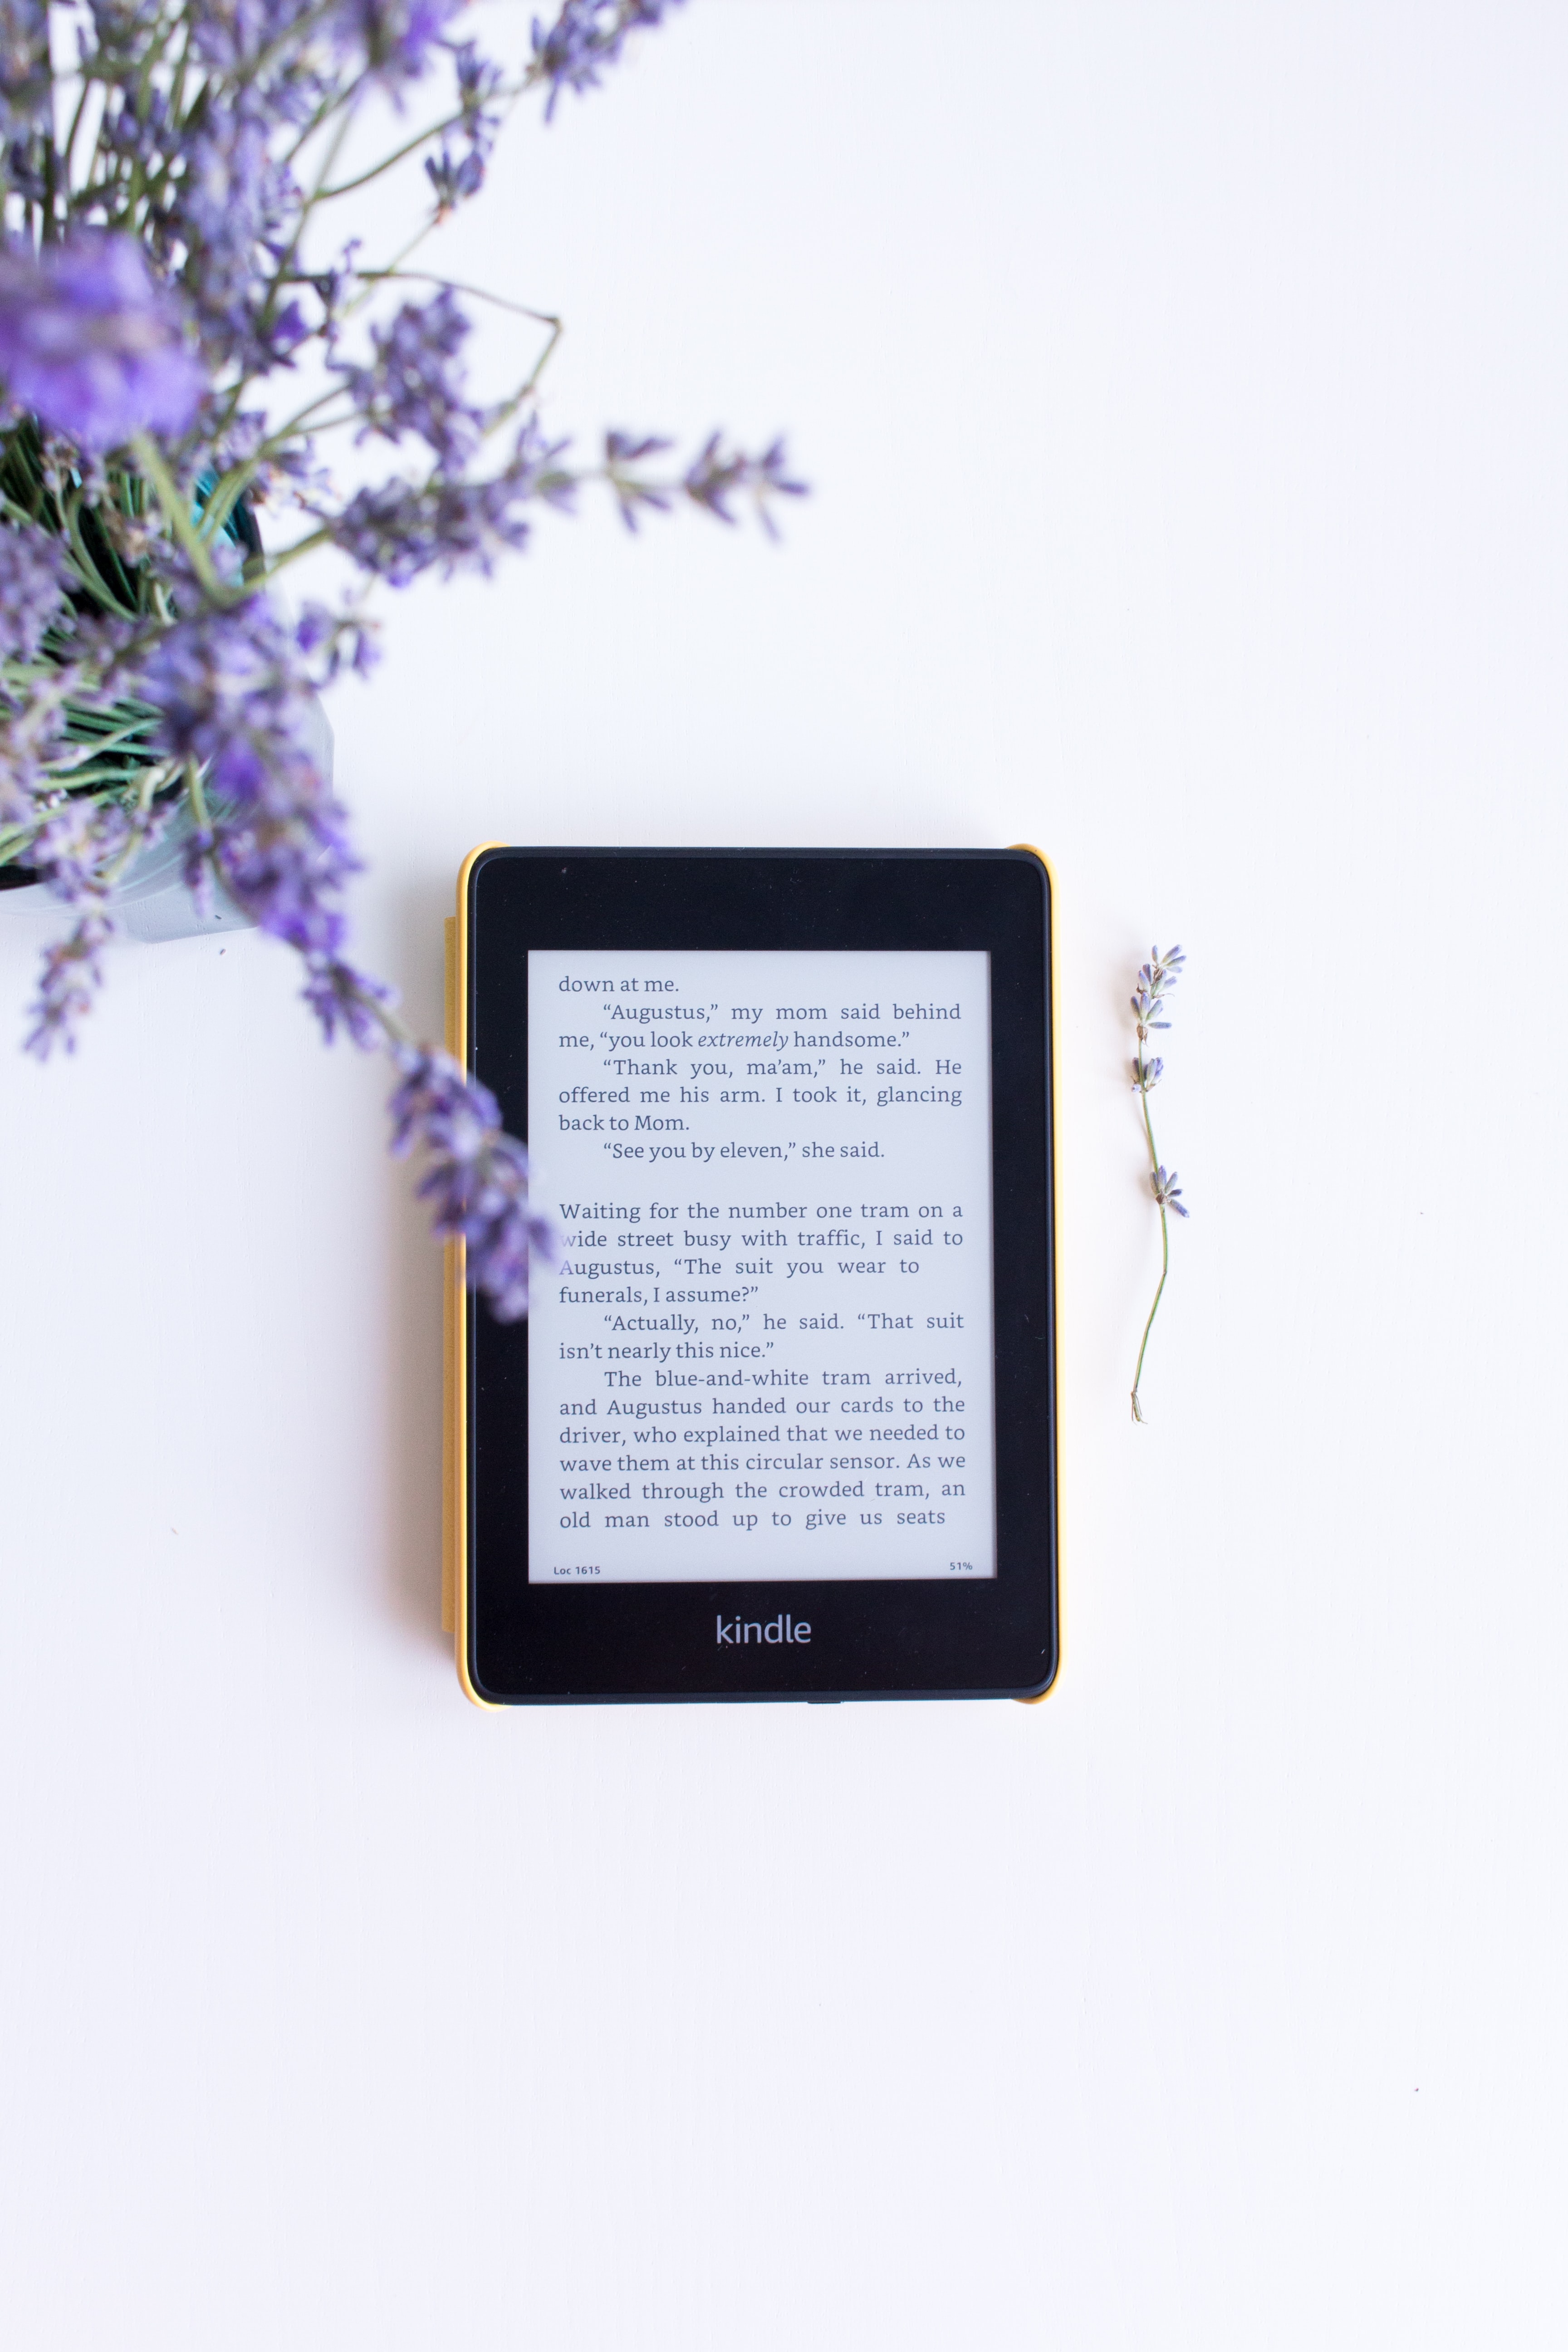 Kindle E reader and purple flowers?